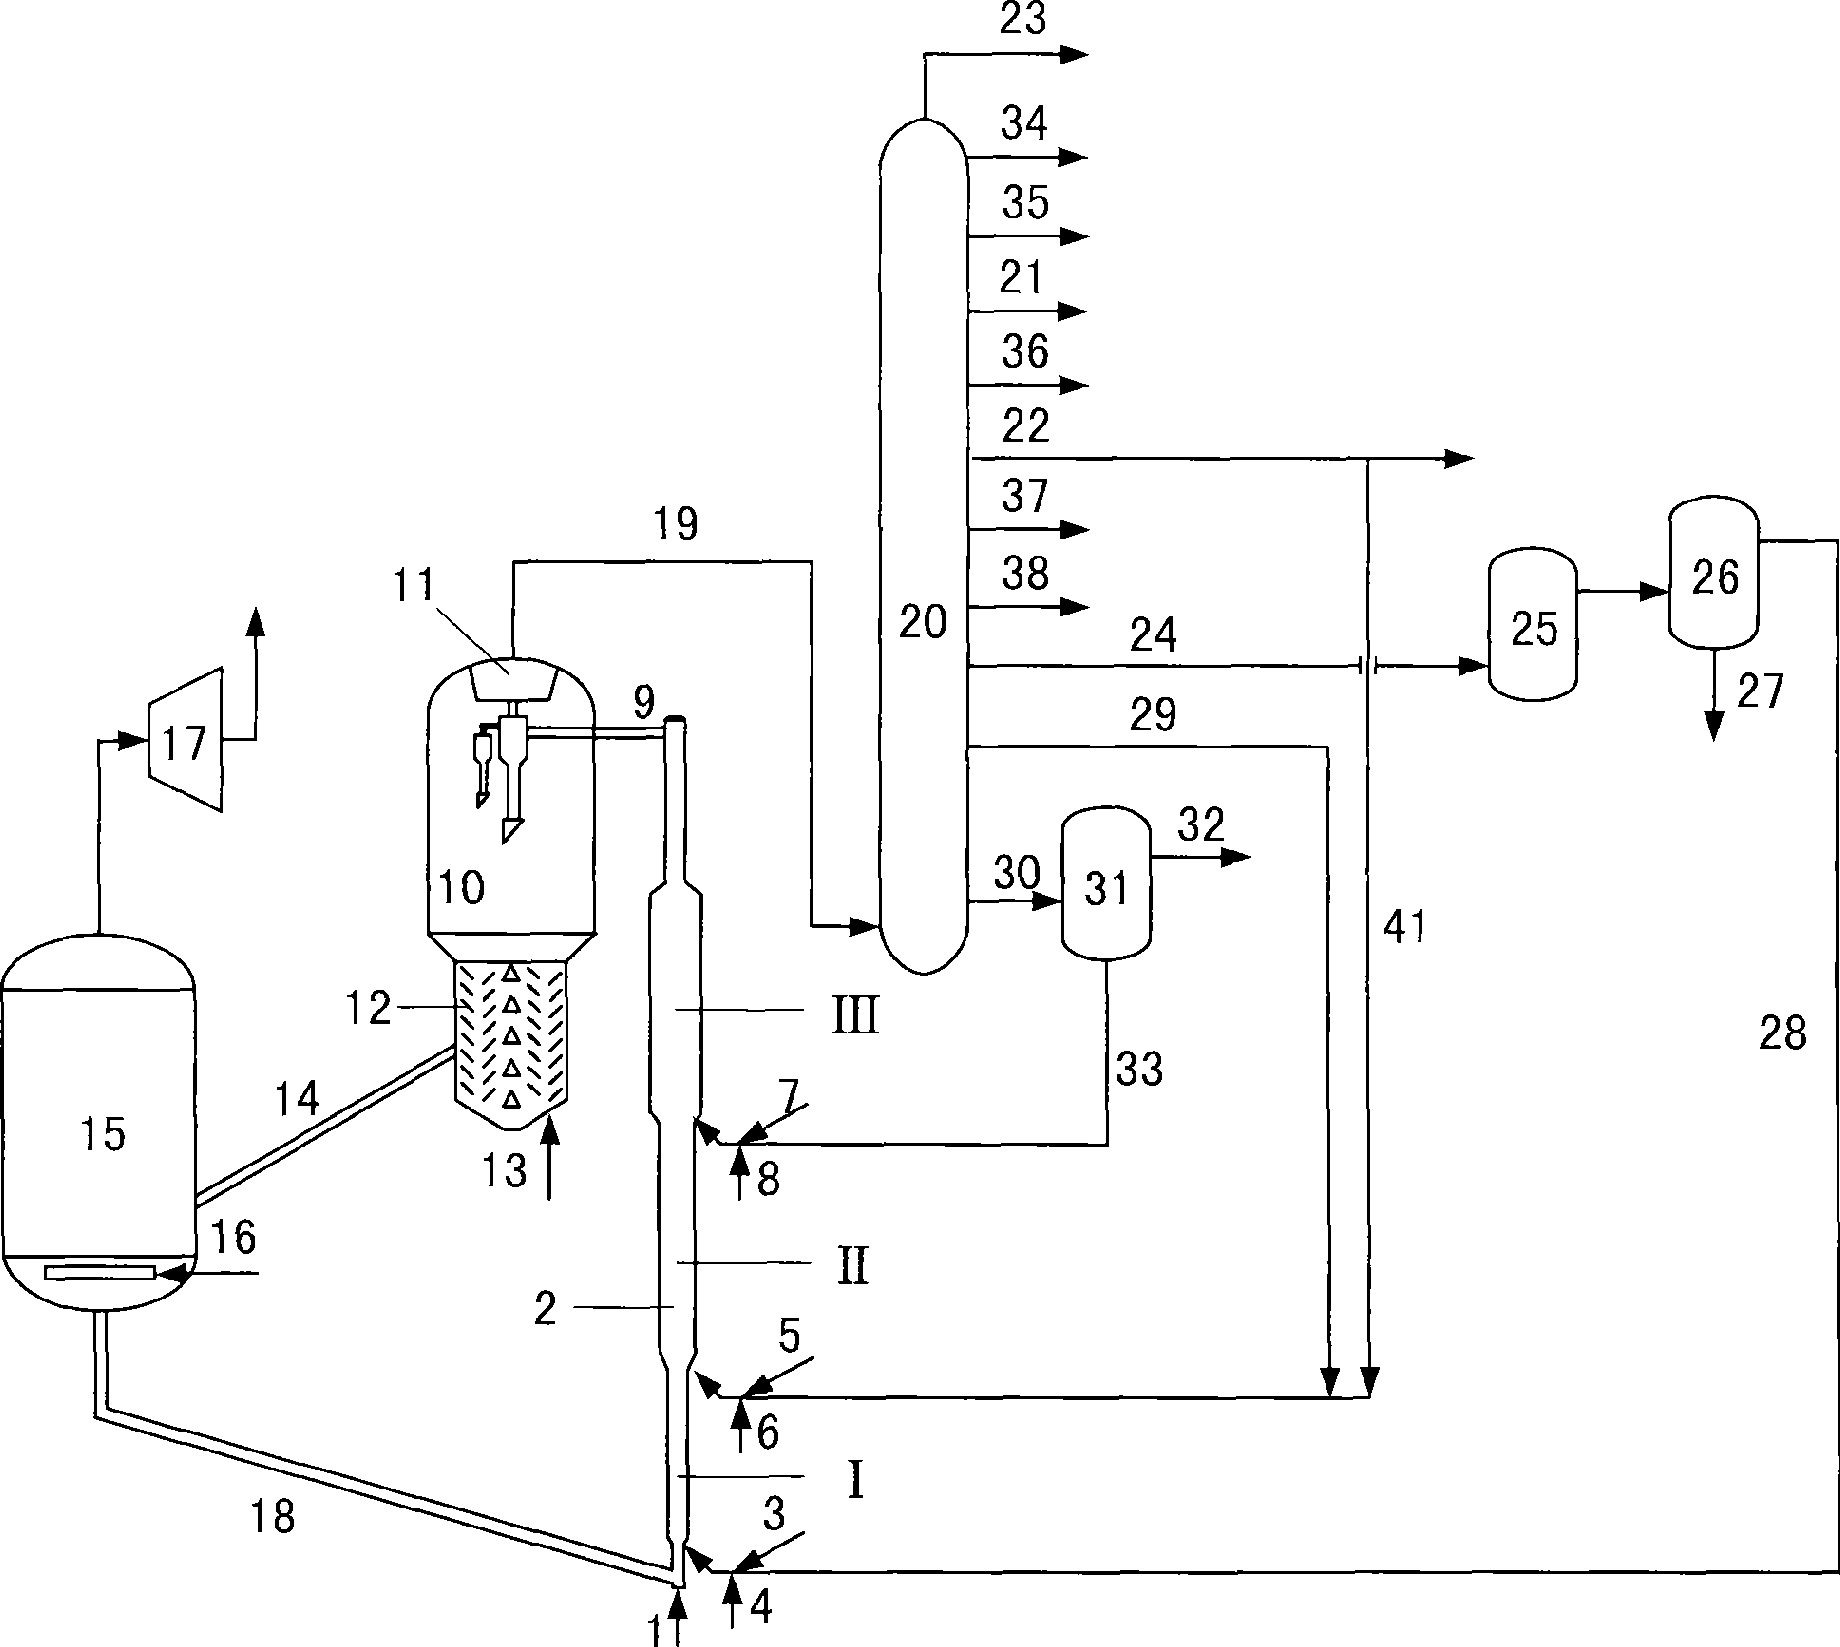 Catalytic conversion method for preparing propylene and aromatic hydrocarbons